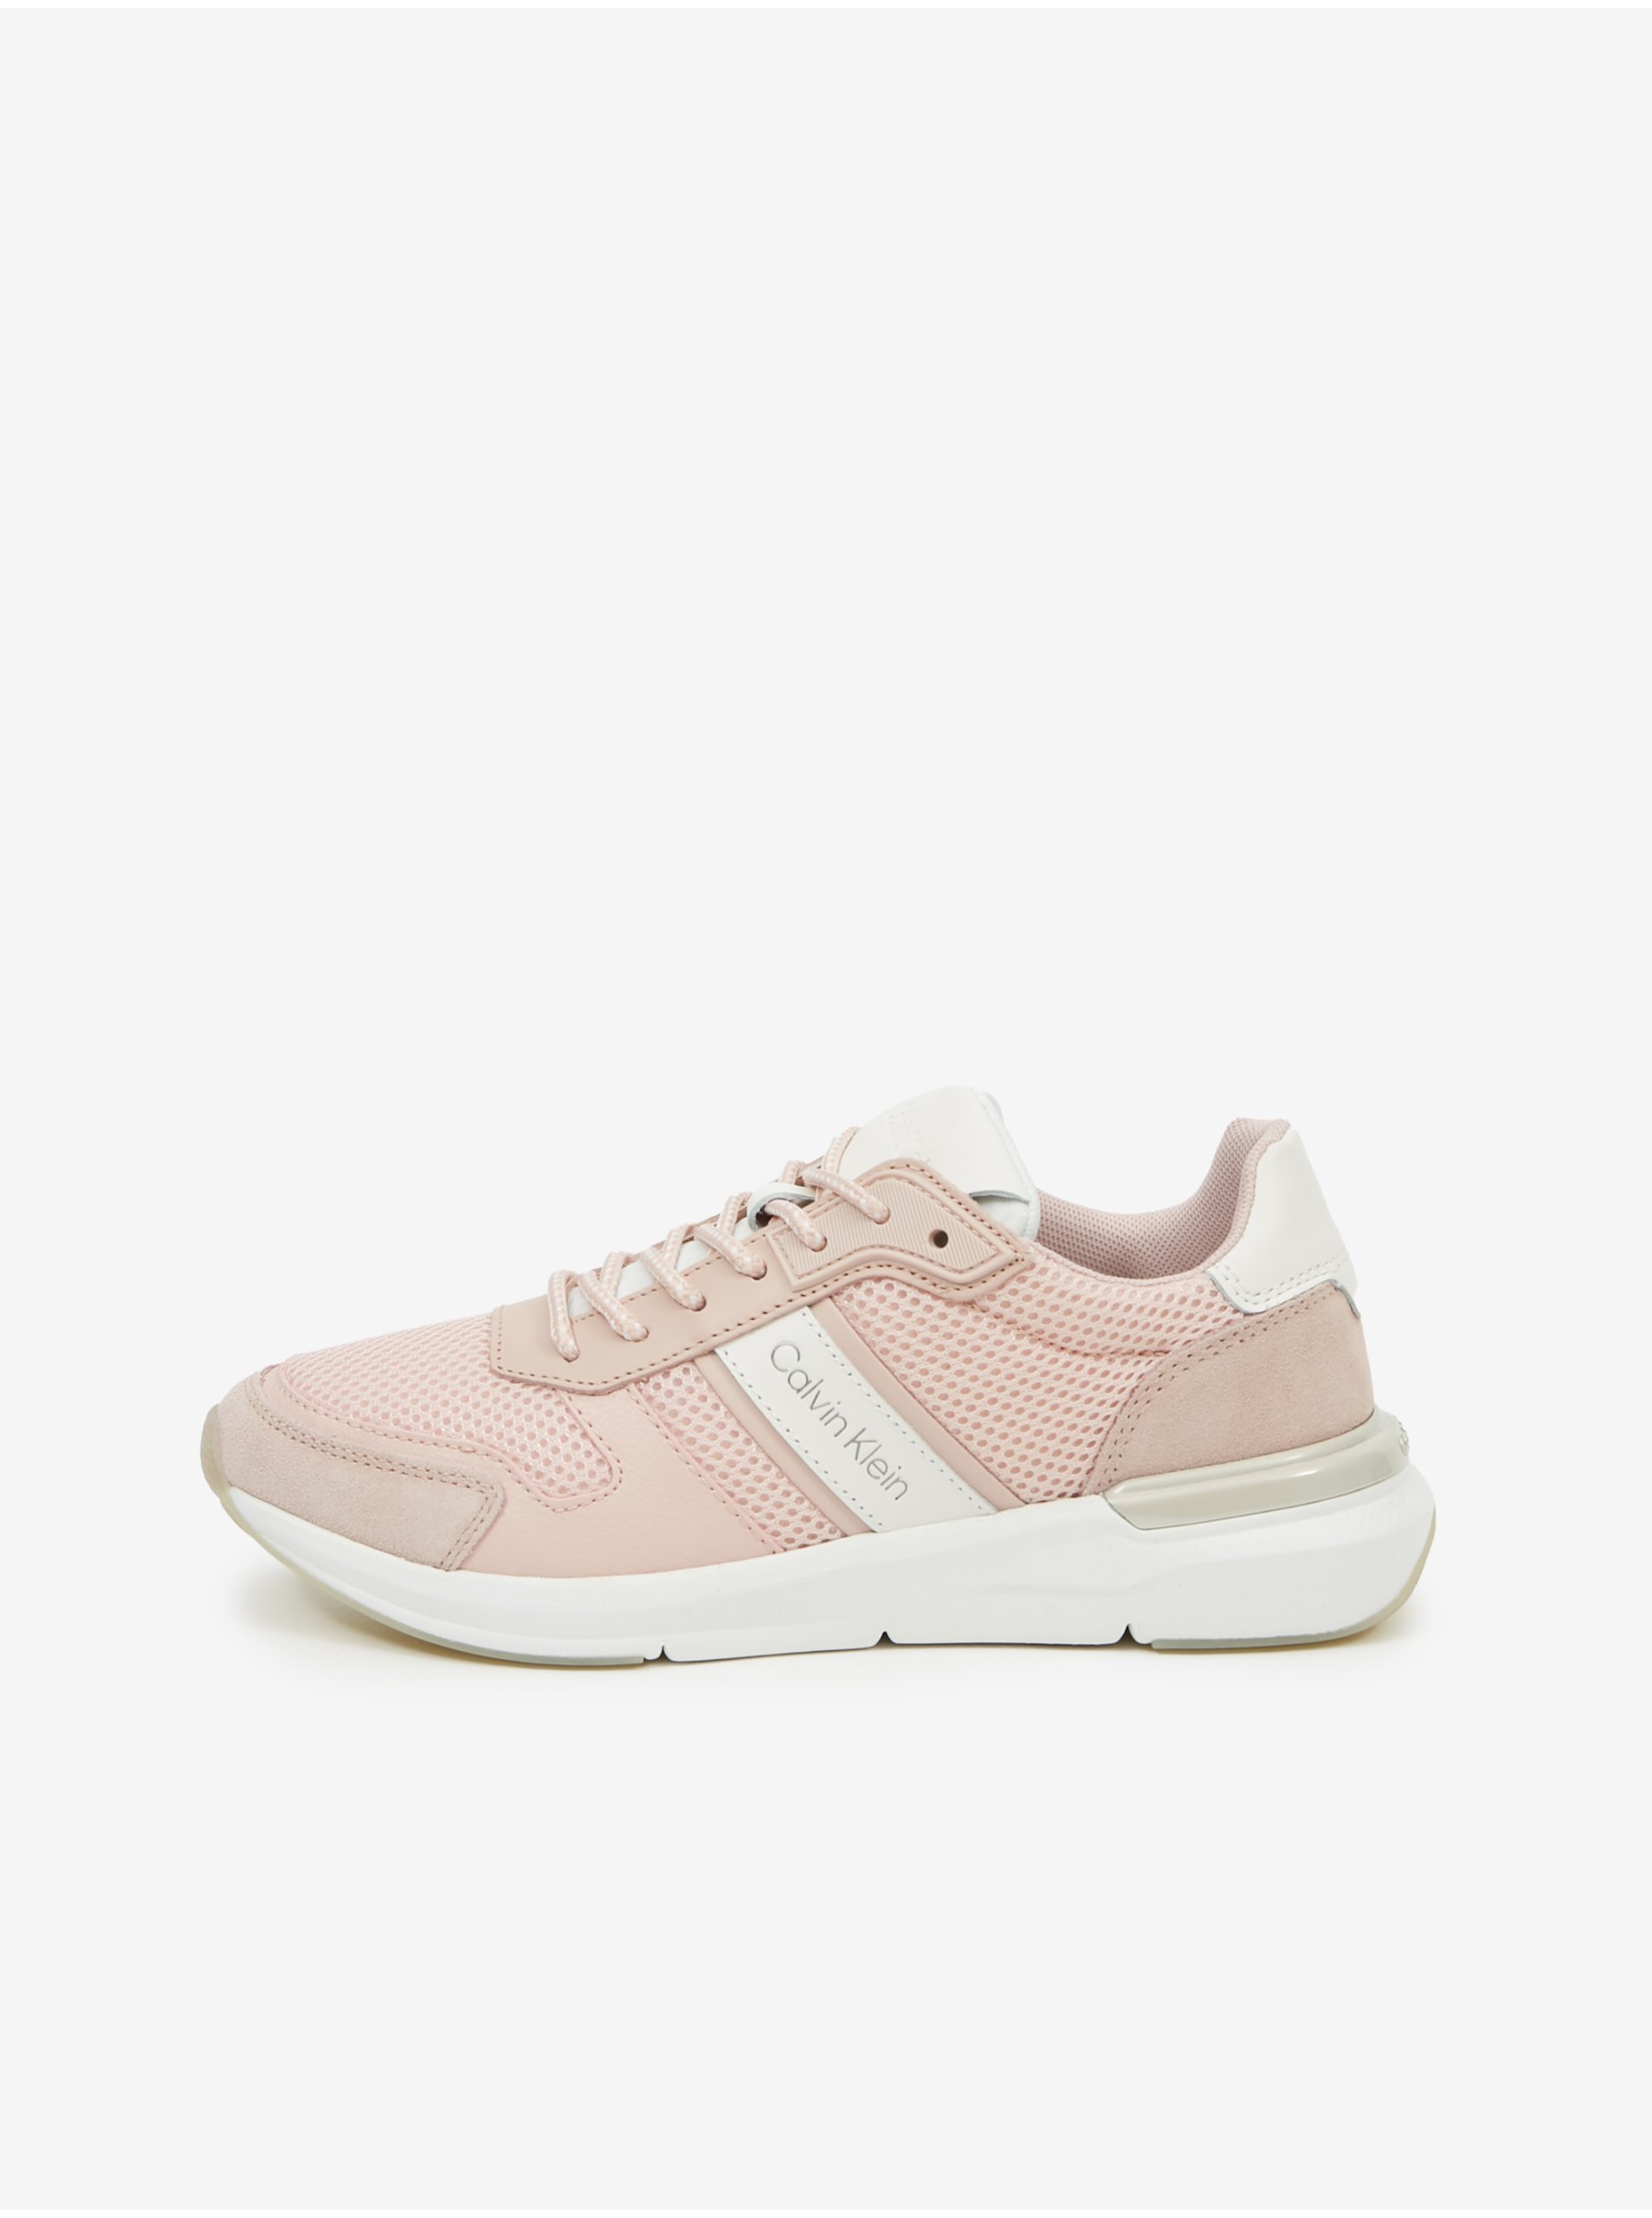 Light pink women's sneakers with leather details Calvin Klein - Women